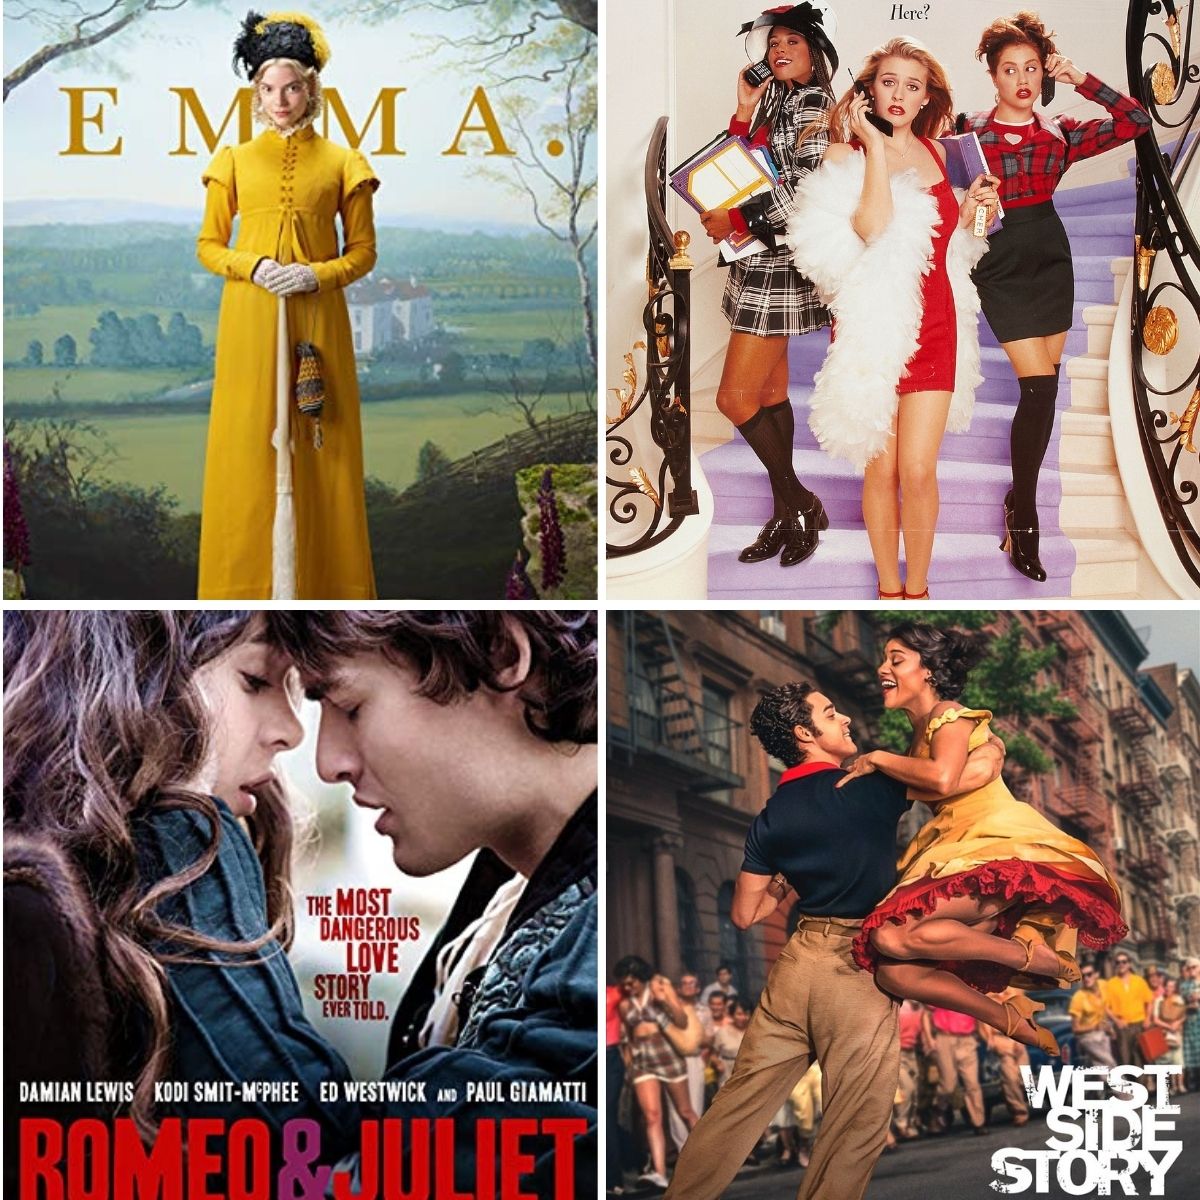 A photo collage shows the classic and modern versions of Emma and Romeo and Juliet.